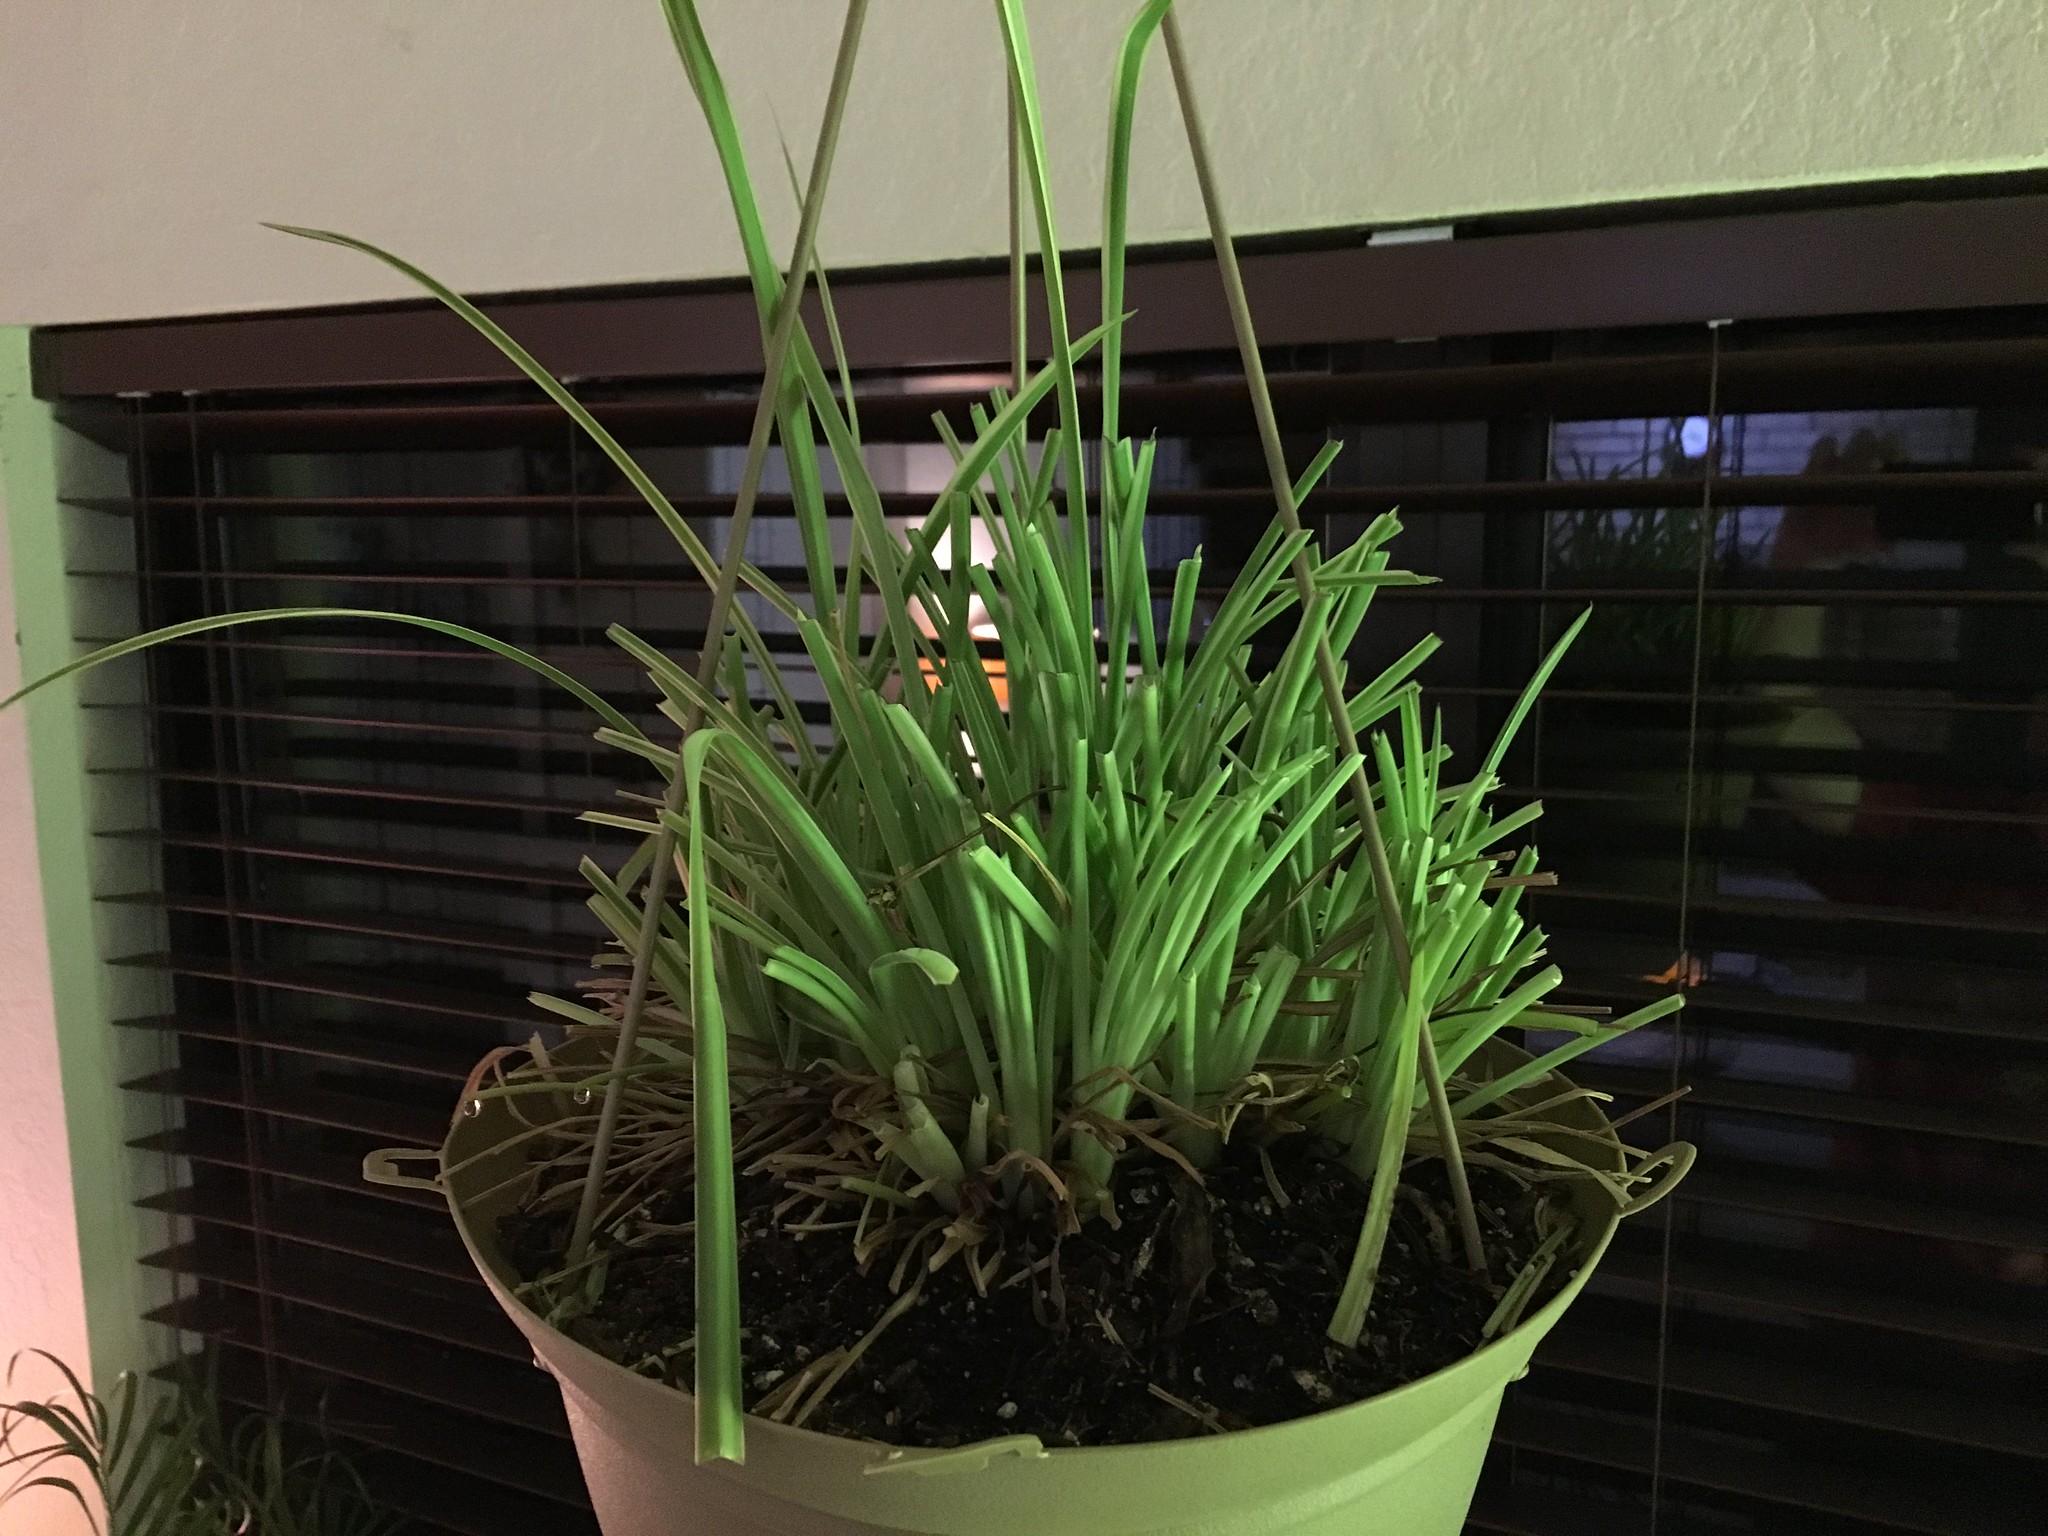 I gave the Spider plant a haircut